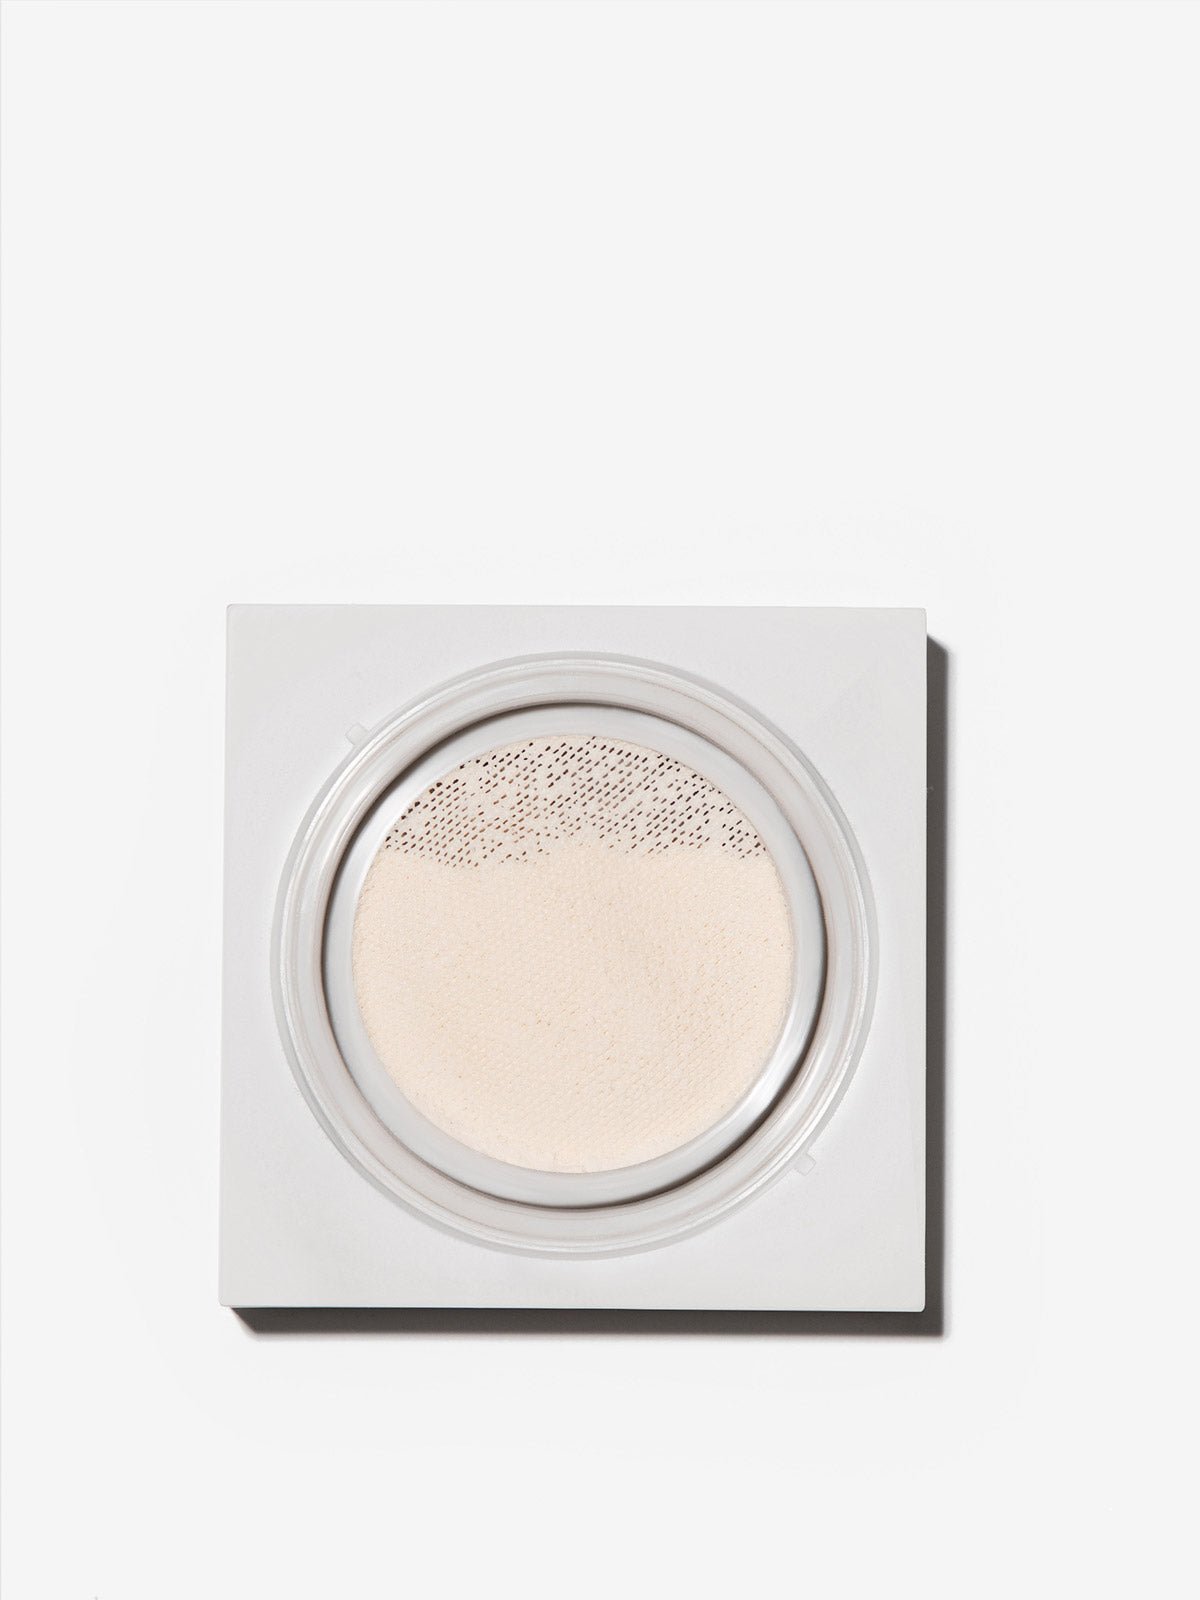 front image of open REFY SKIN FINISH IN SHADE 01